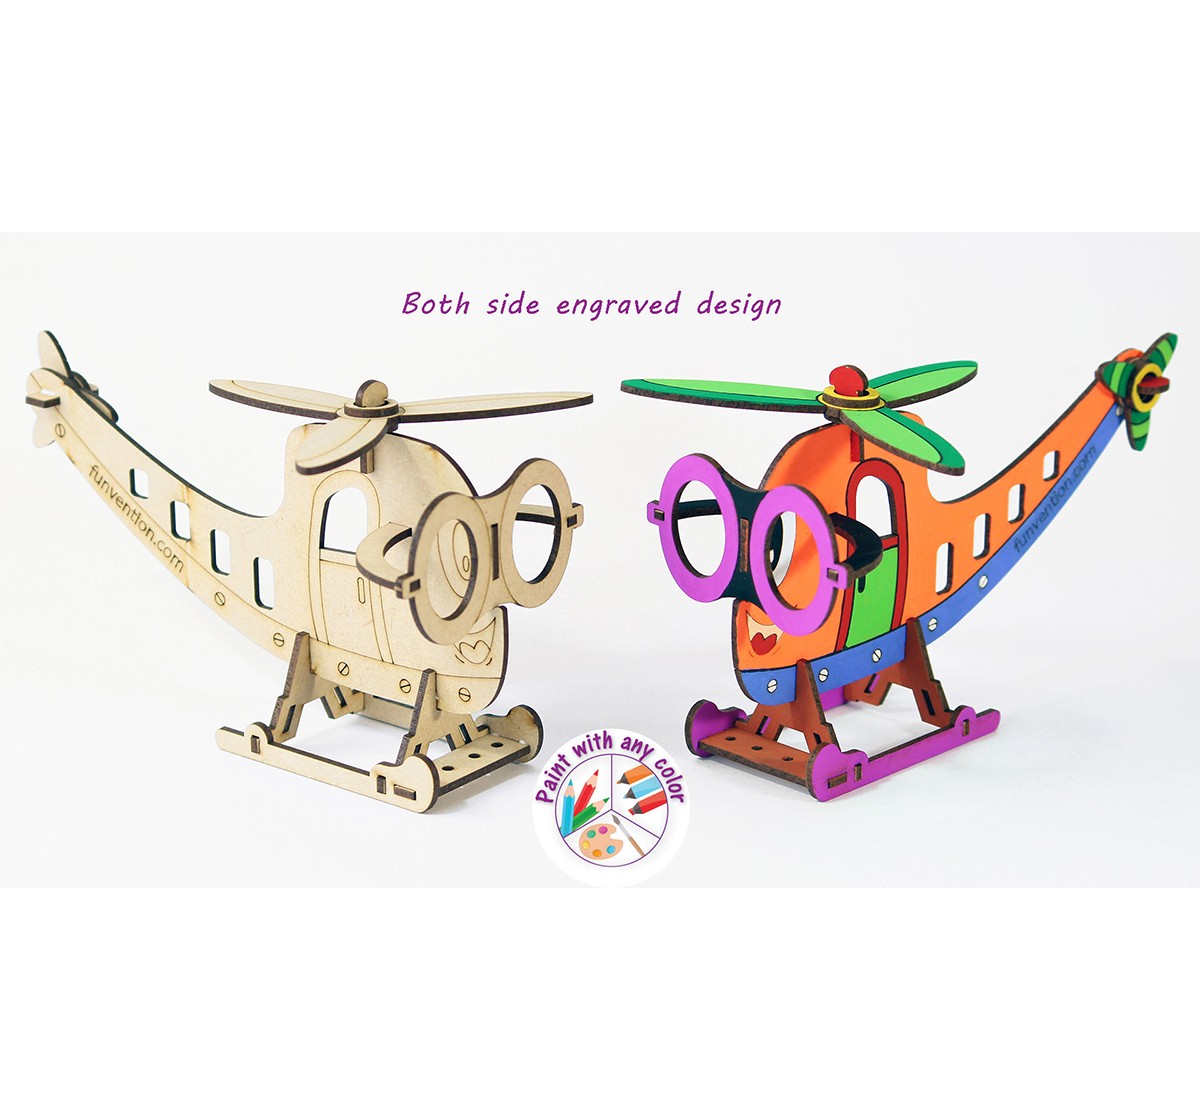 Funvention 3D Coloring Model - Helicopter Stem for Kids Age 5Y+